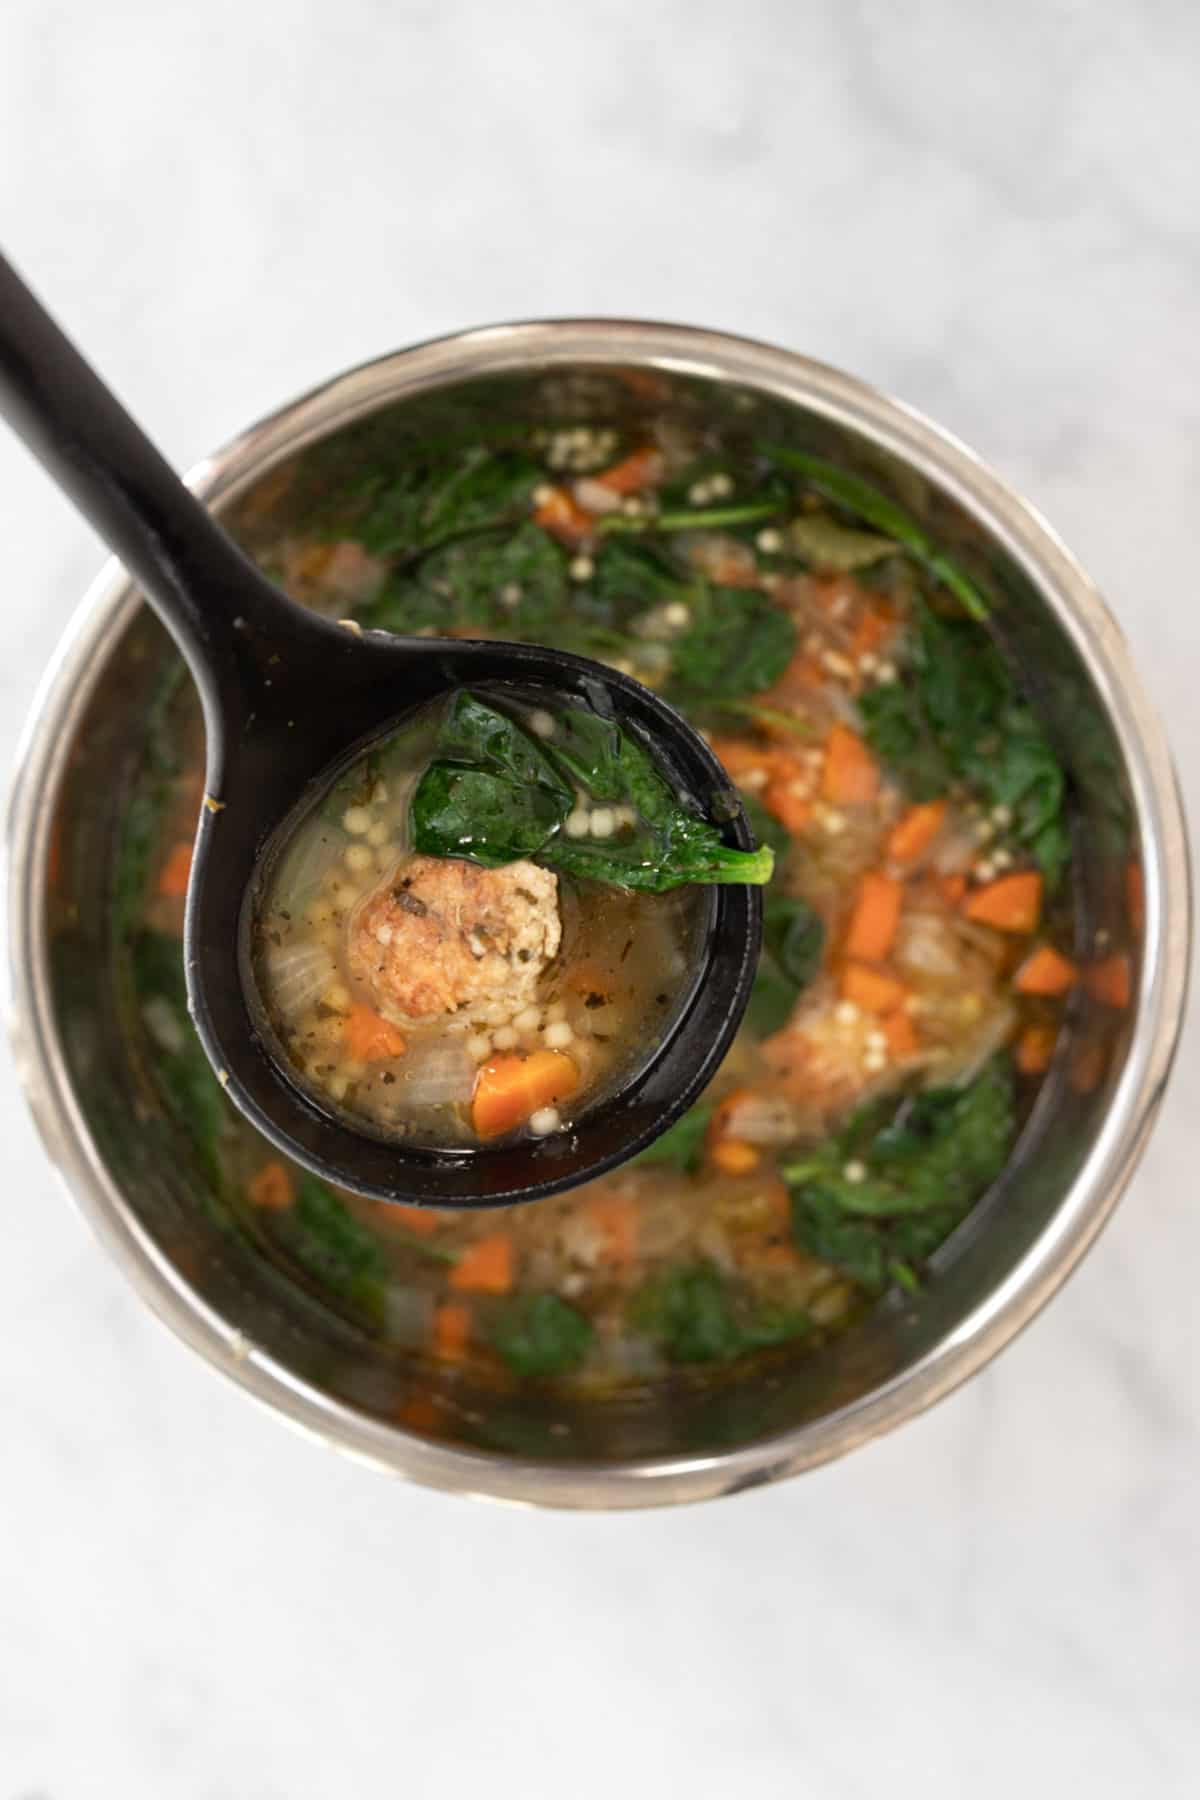 Italian wedding soup in a black ladle hovering over the pot of an instant pot.